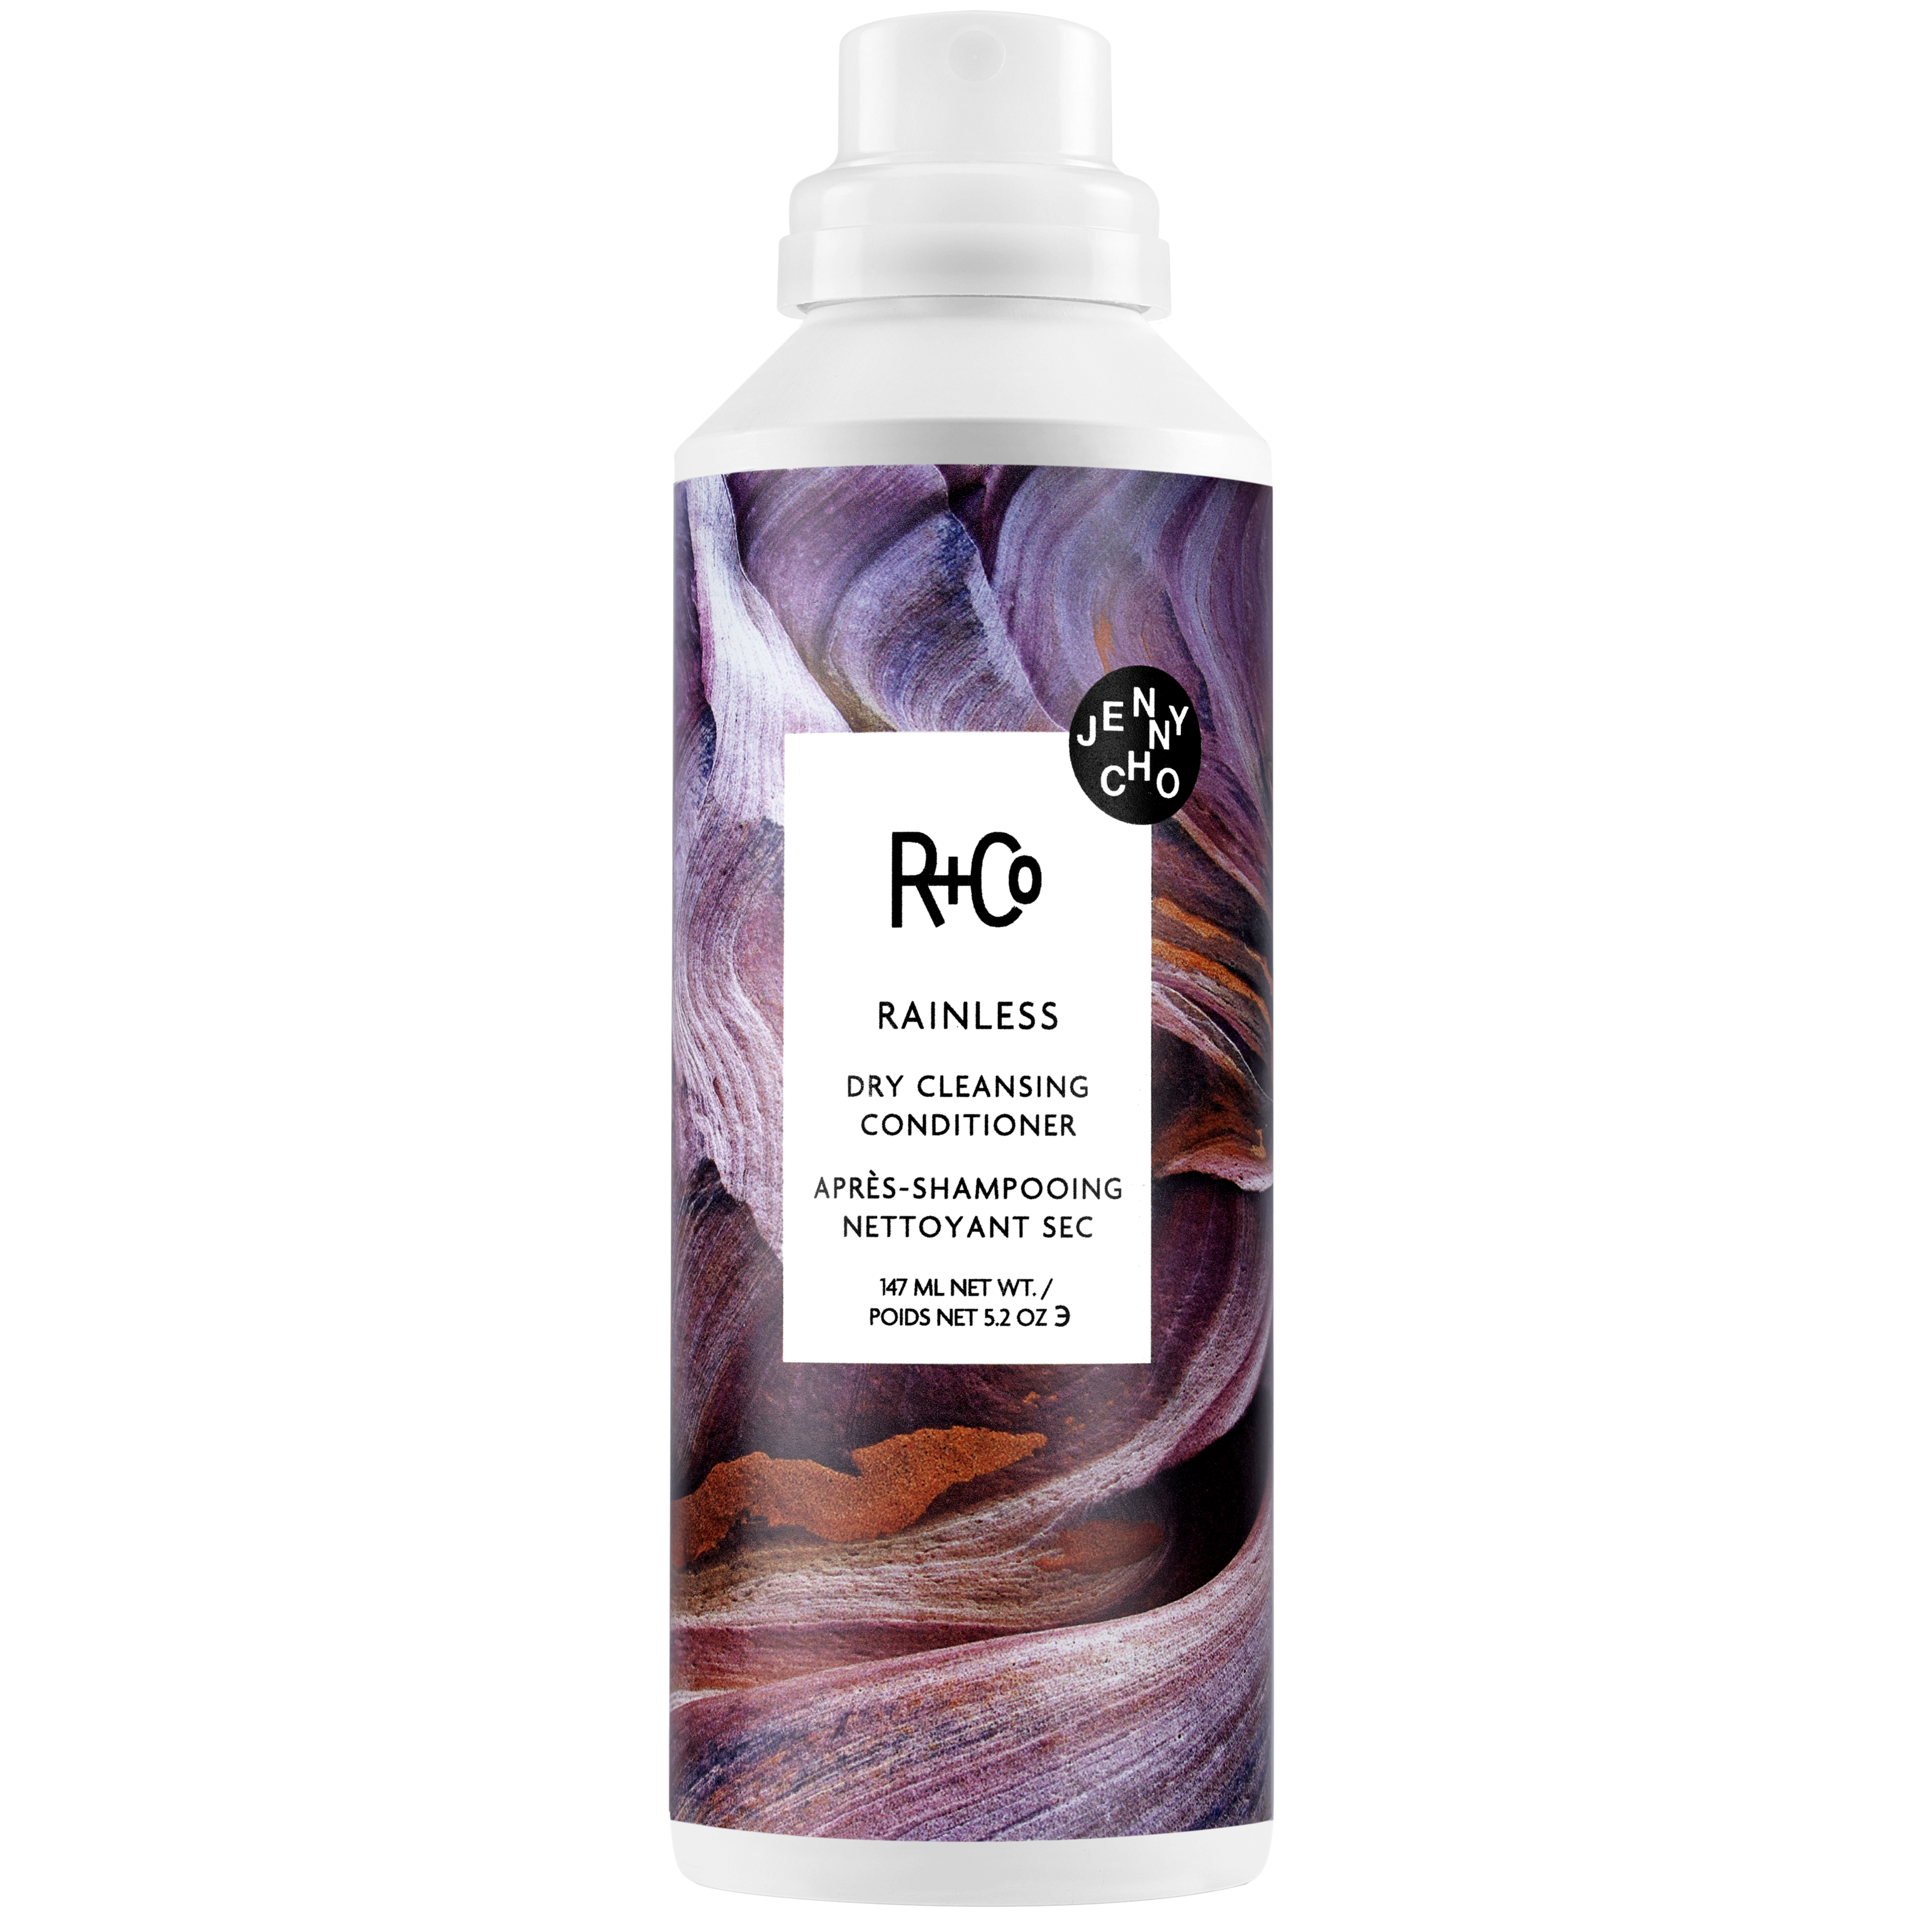 R+Co RAINLESS Dry Cleansing Conditioner (147ml)